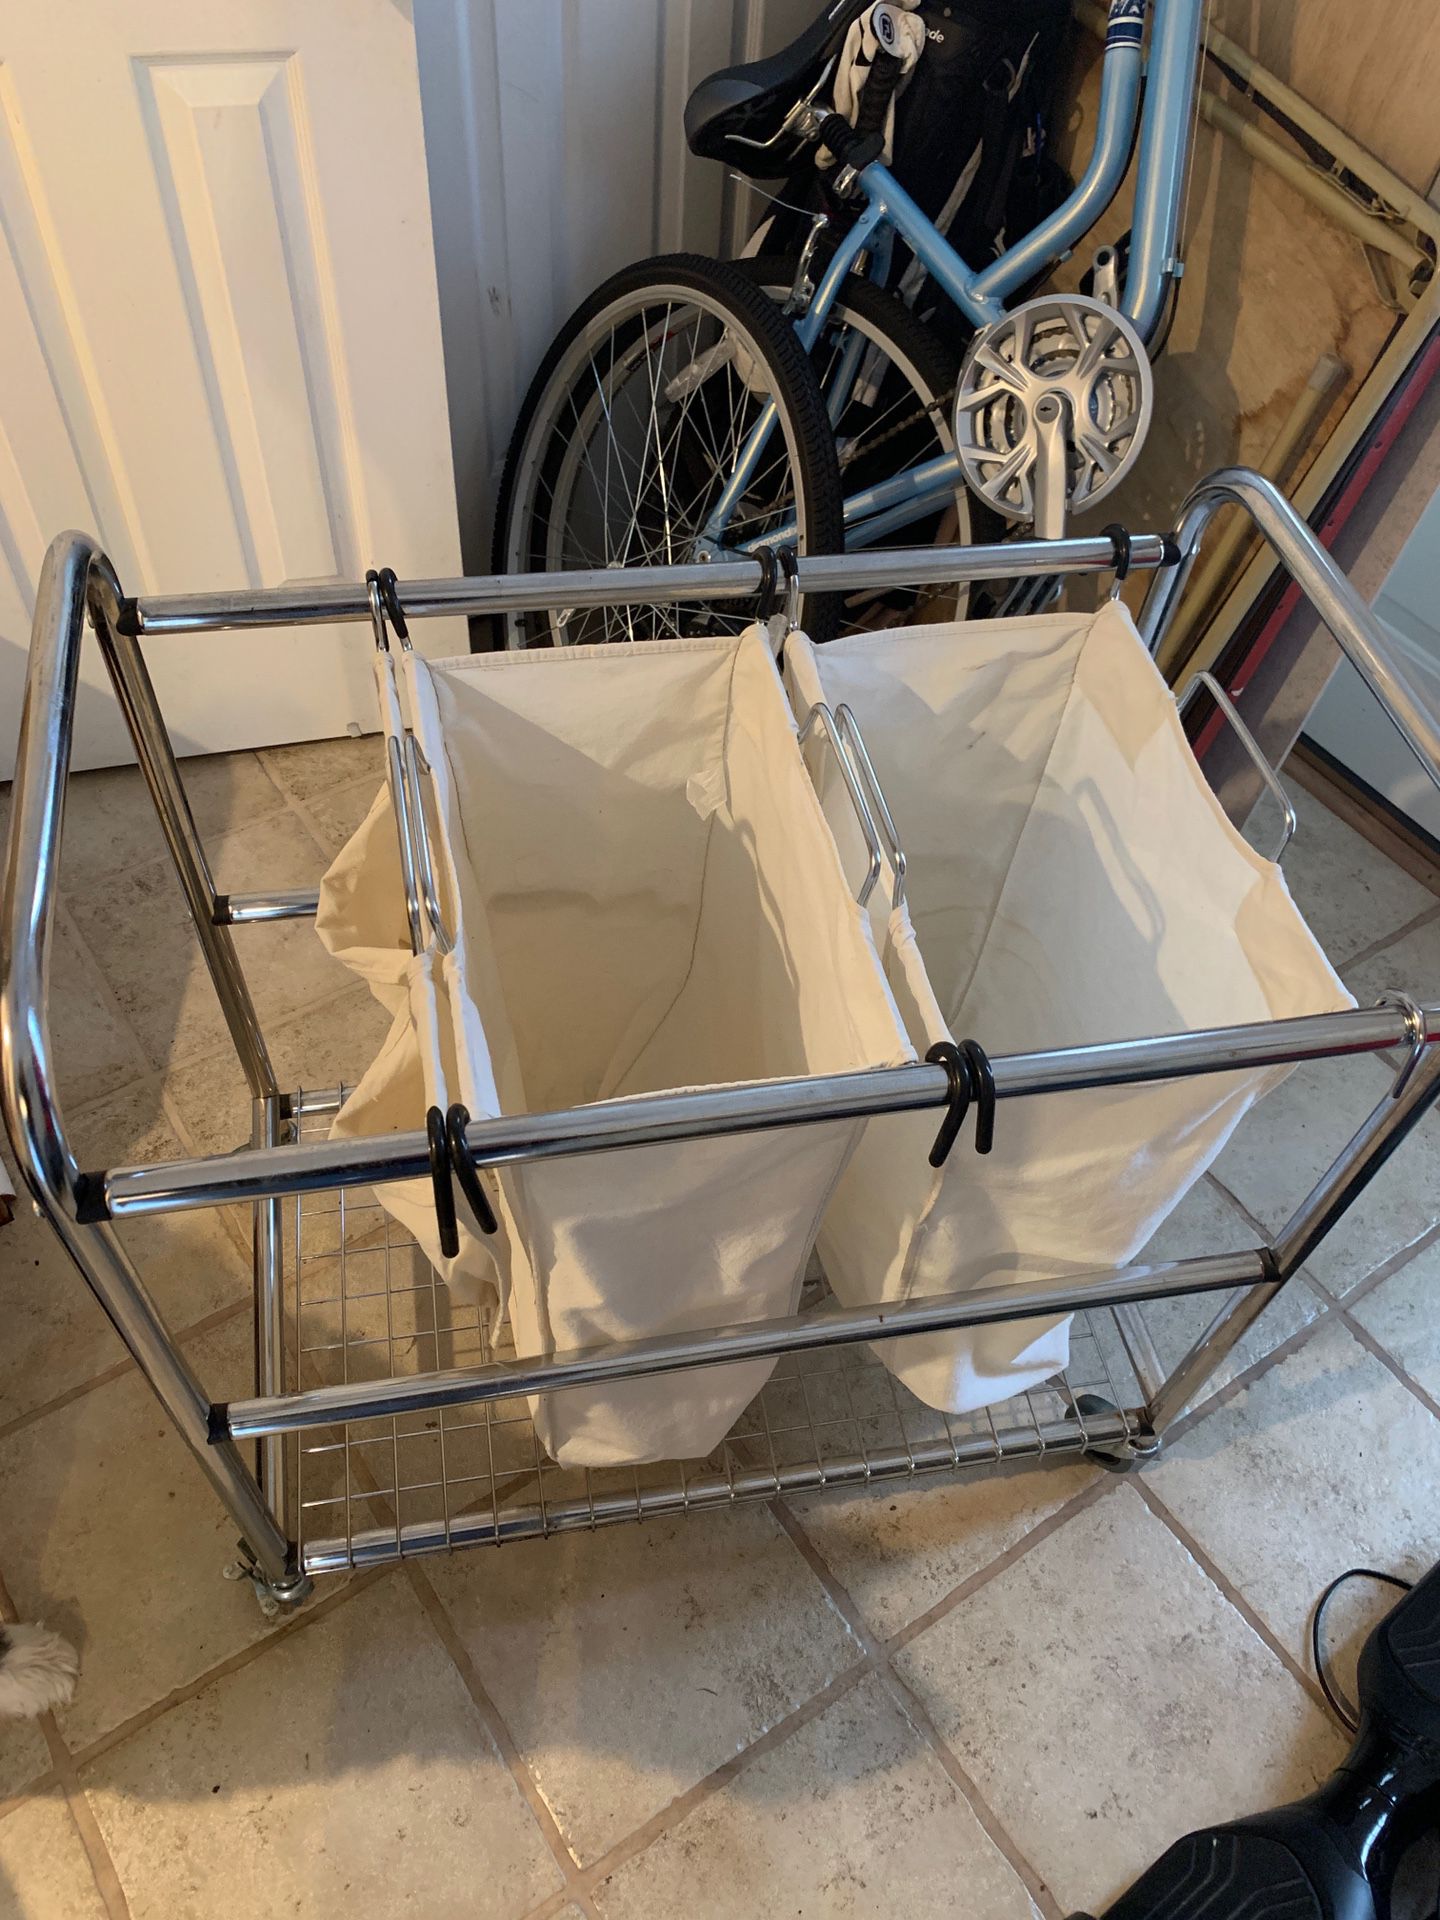 Heavy-Duty 2-Bag Laundry Sorter with Wheels - Chrome & Off White